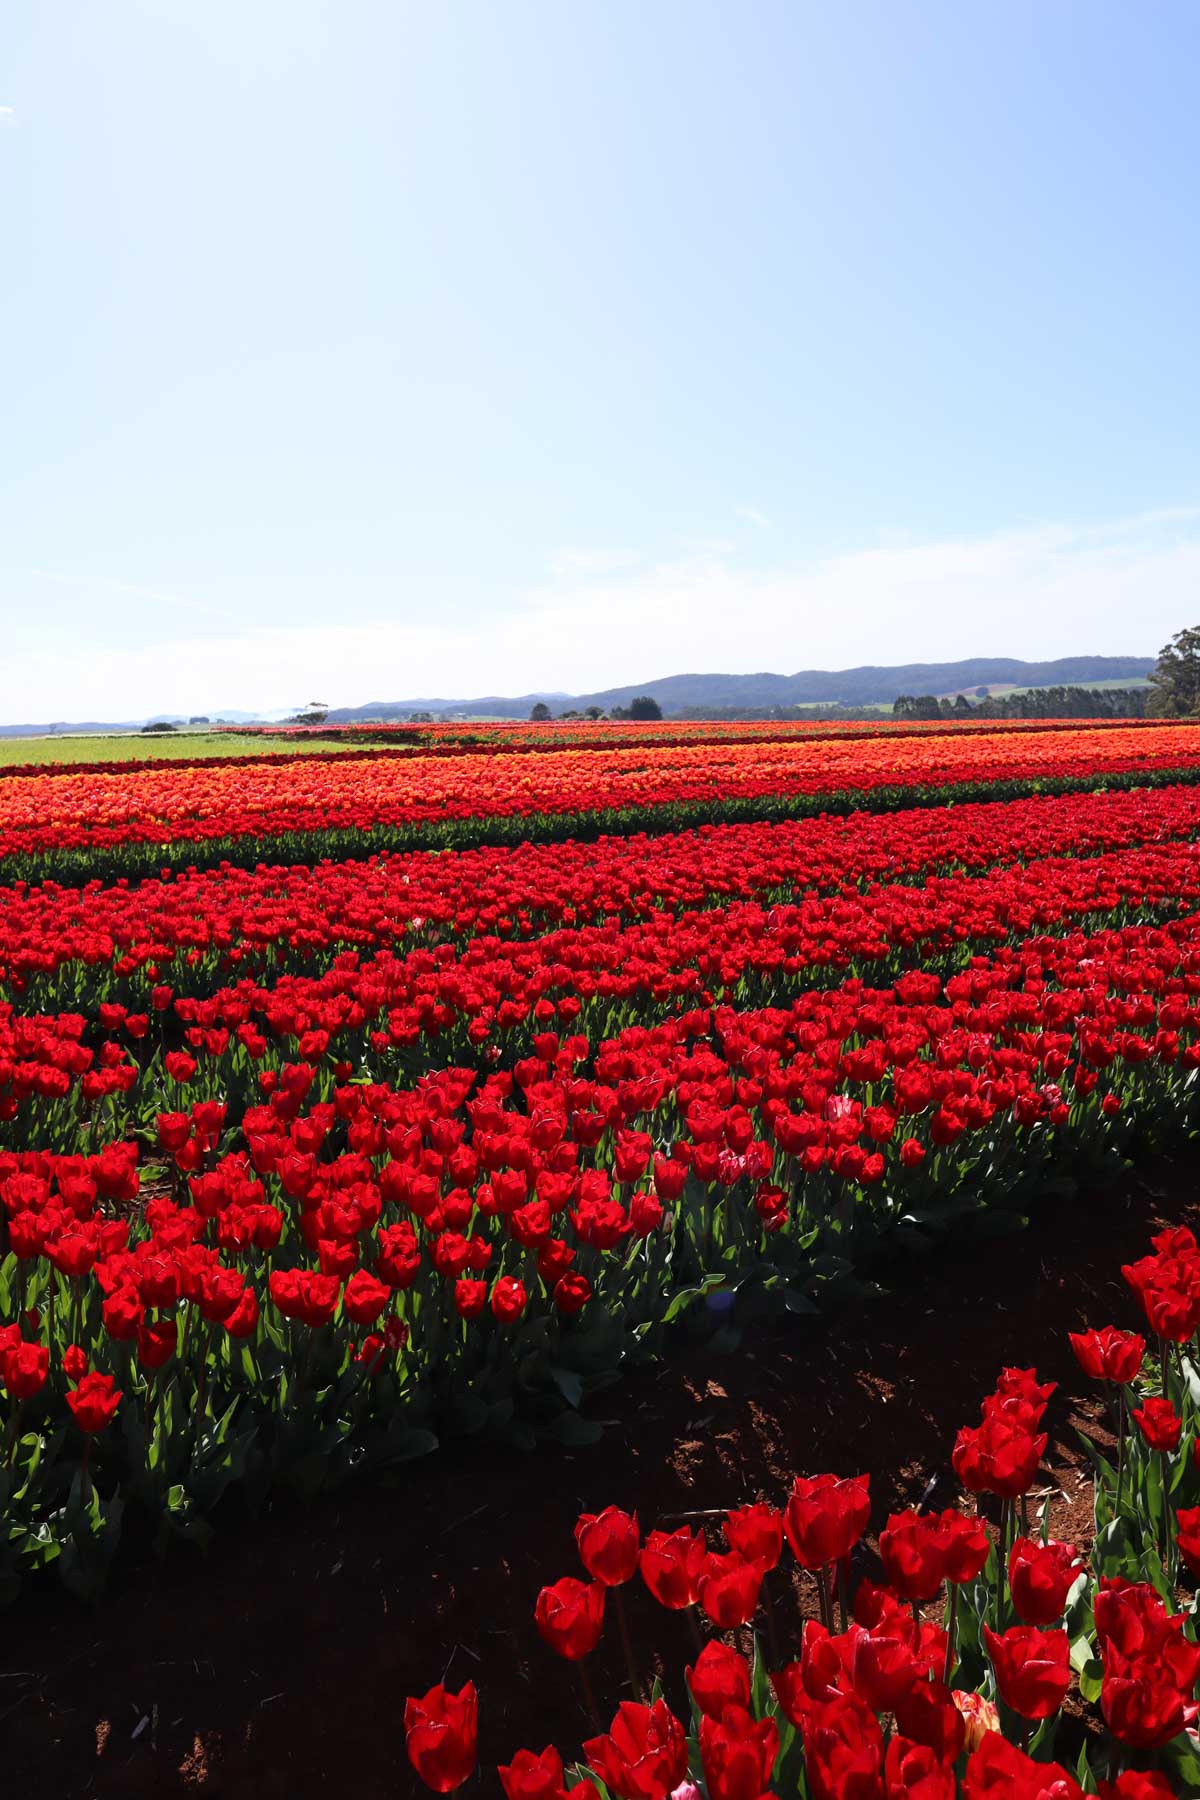 Capture yourself amidst blooming tulips on our exclusive farm tour. Tip toe amongst the tulips. Limited spots available – book now!